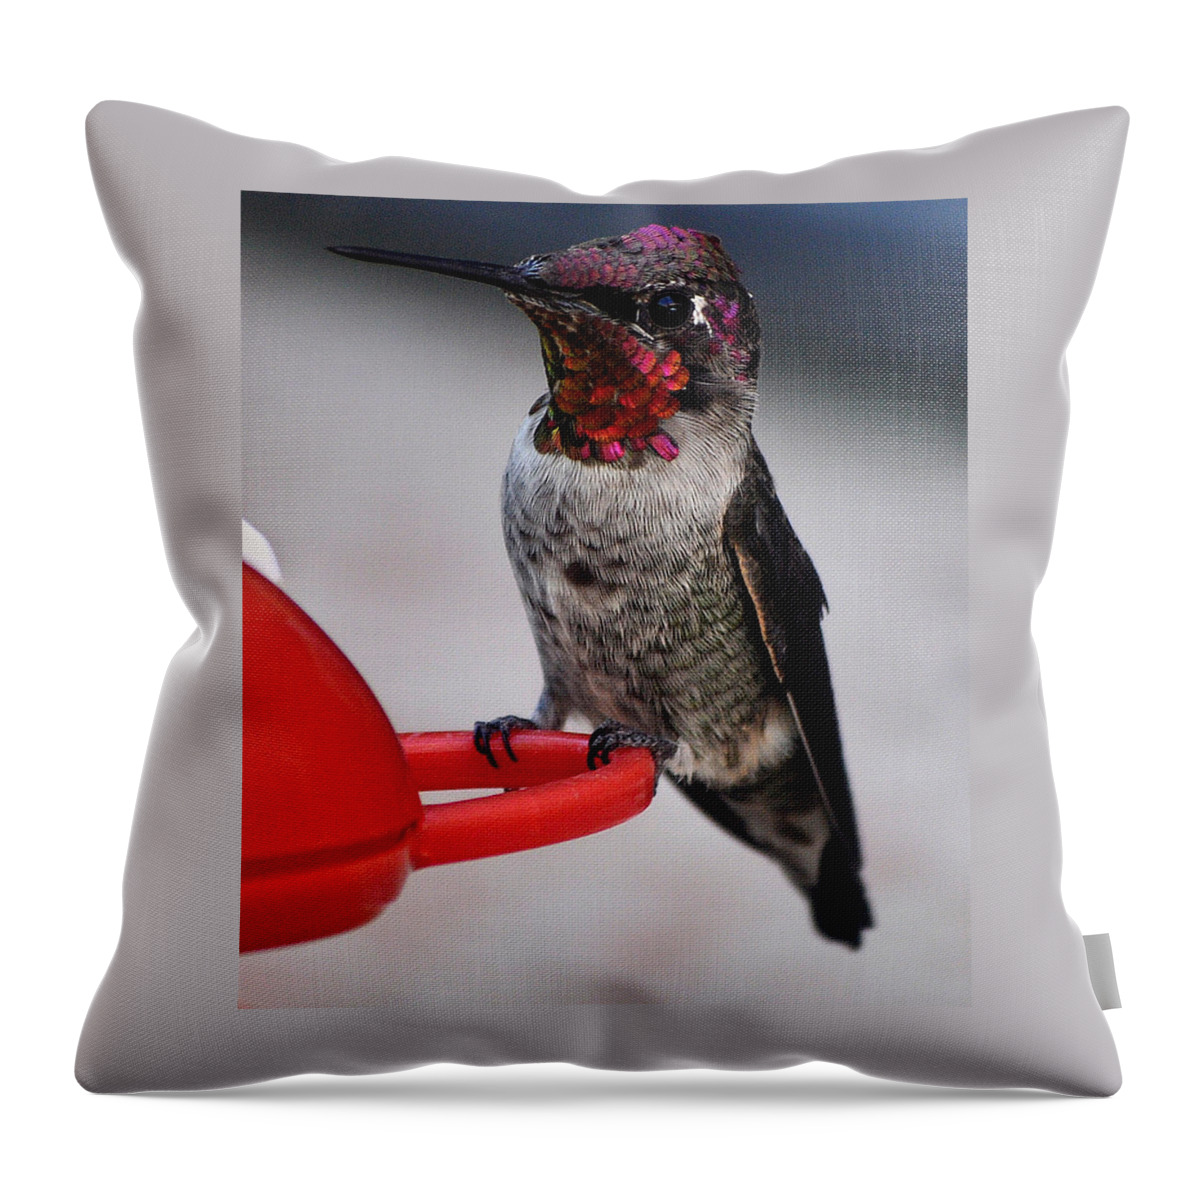 Hummingbird Throw Pillow featuring the photograph Multi Colored Hummingbird Male Anna by Jay Milo